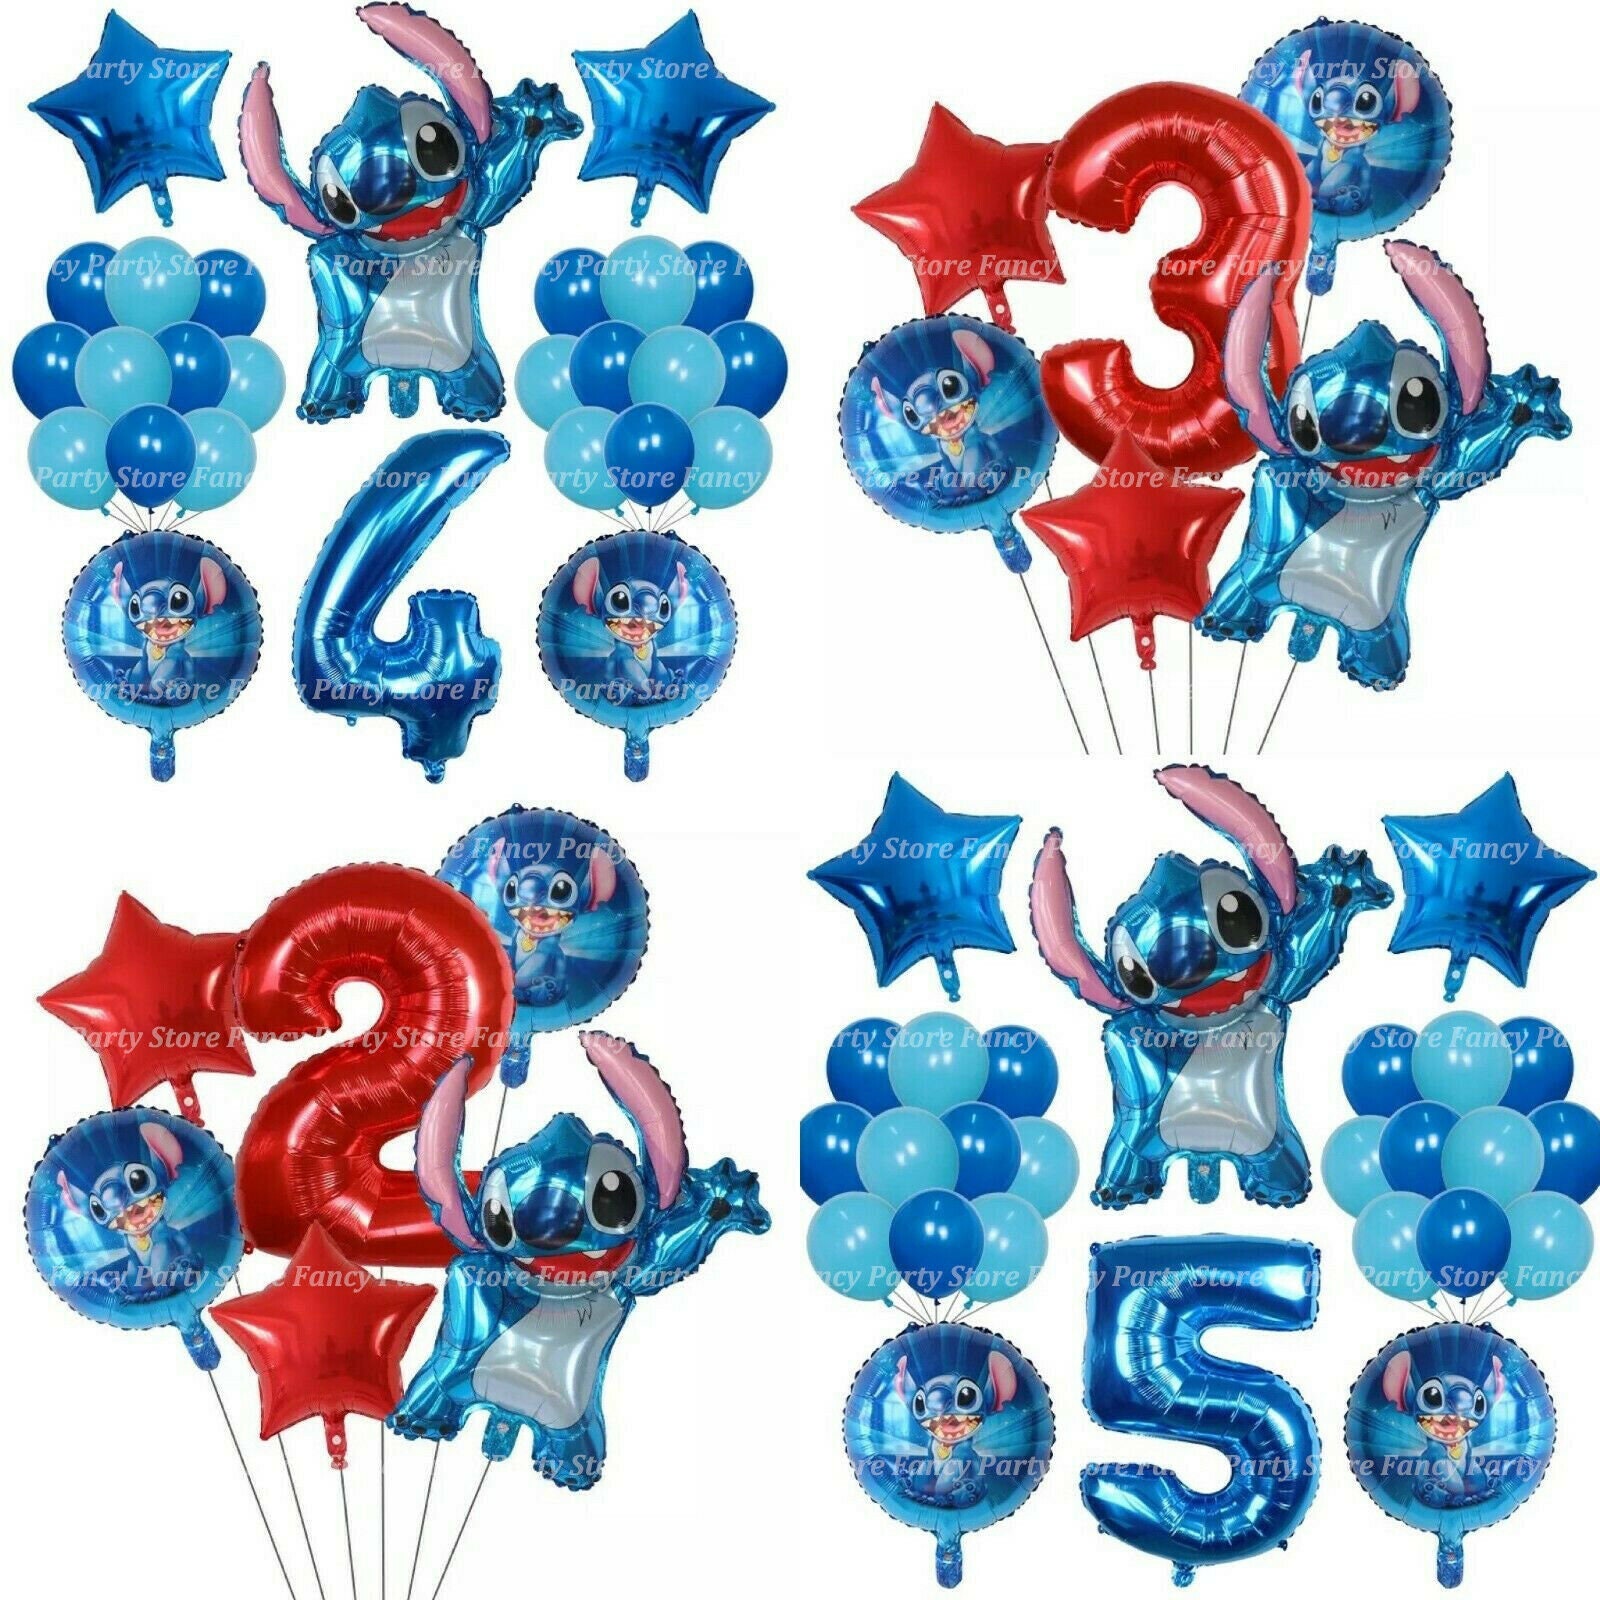 Lilo and Stitch Balloons Set Foil Balloon Birthday Party Decorations